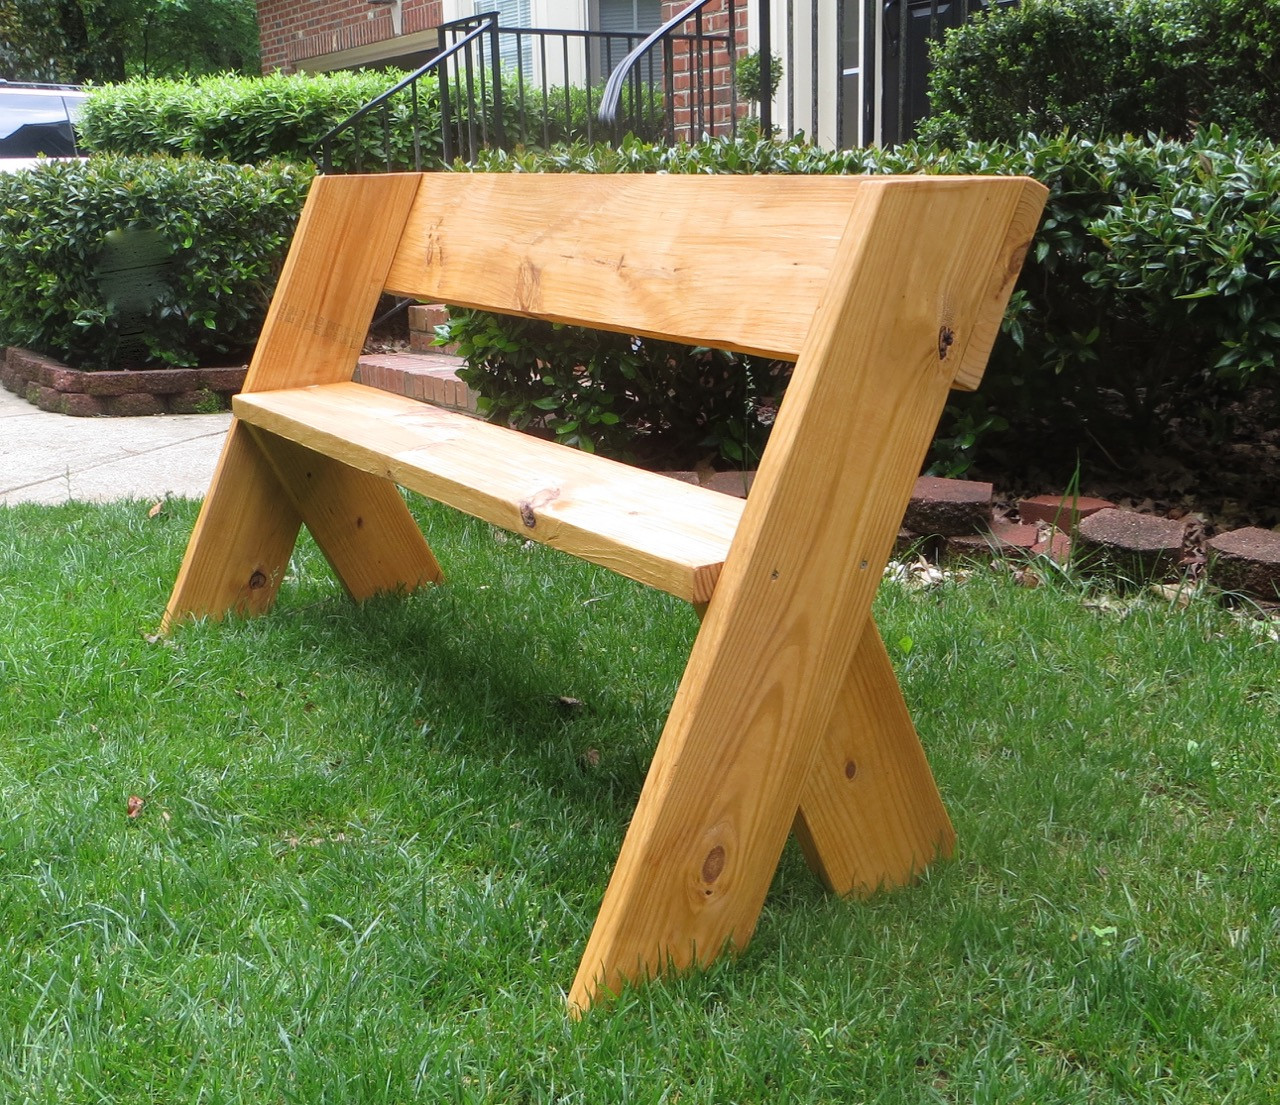 DIY Outdoor Wooden Bench
 The Project Lady DIY Tutorial – $16 Simple Outdoor Wood